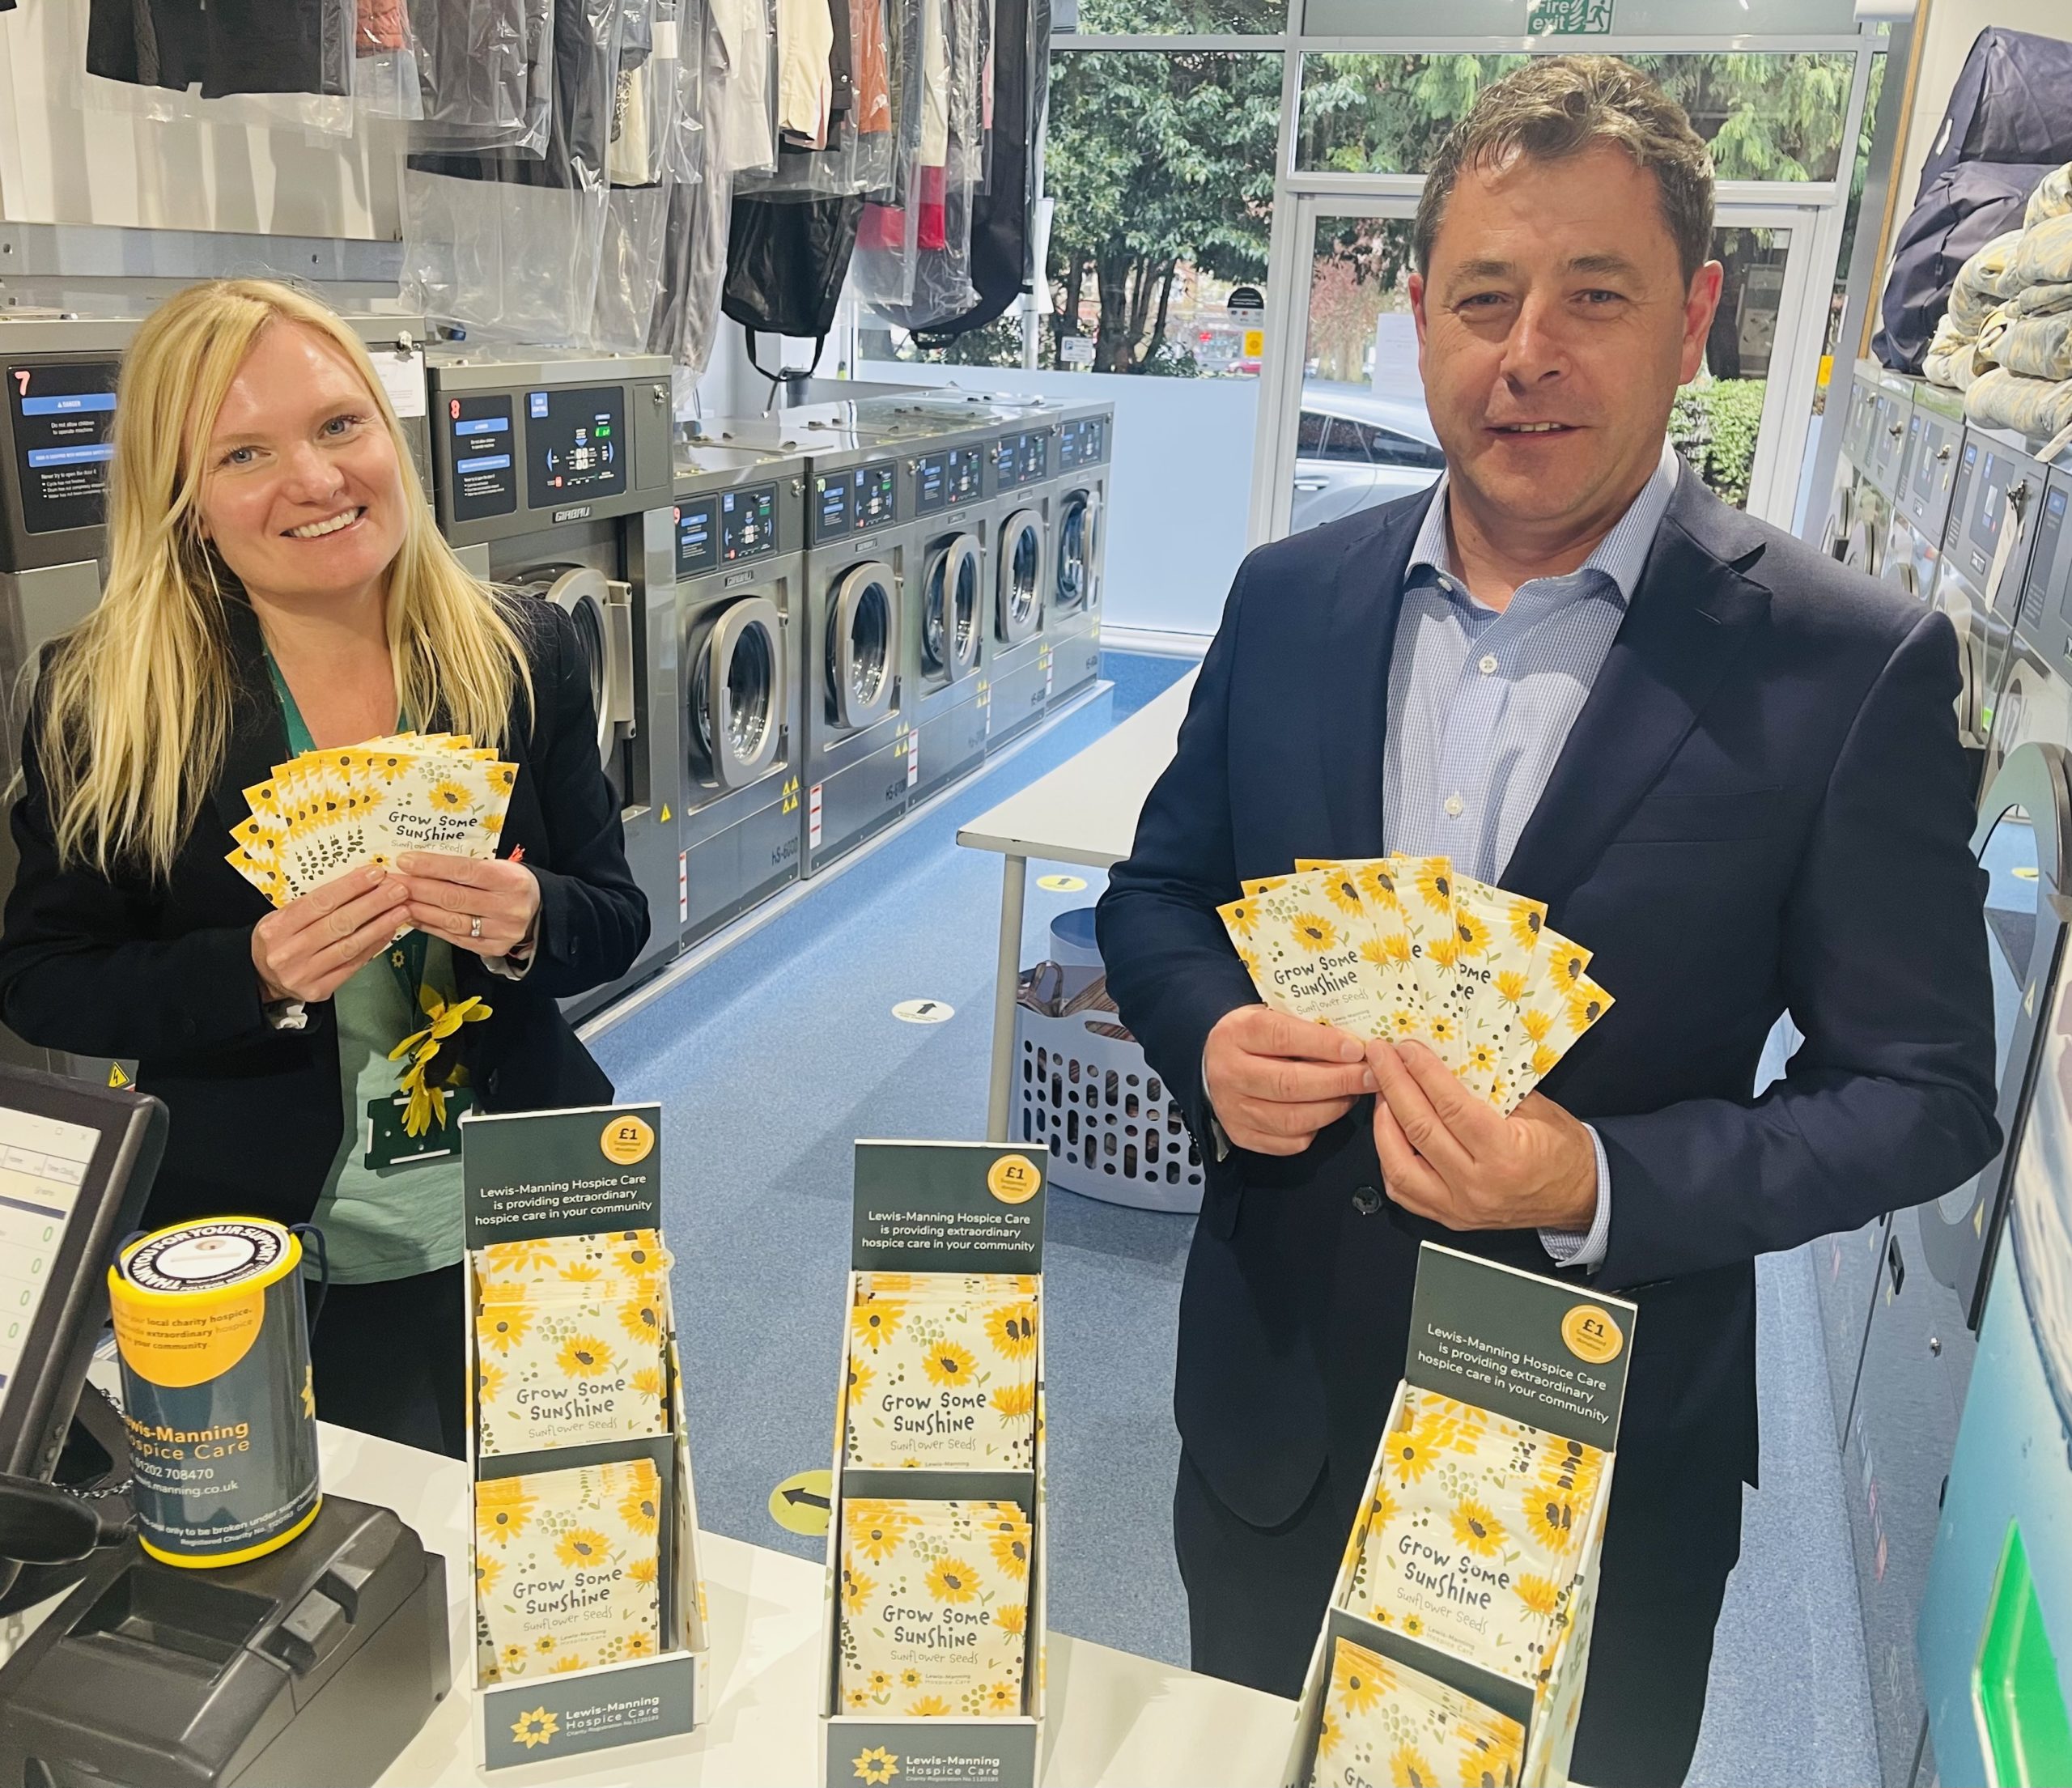 Barker Dry Cleaning and Laundry shows incredible support for Lewis-Manning Hospice Care’s ‘Grow Some Sunshine’ campaign